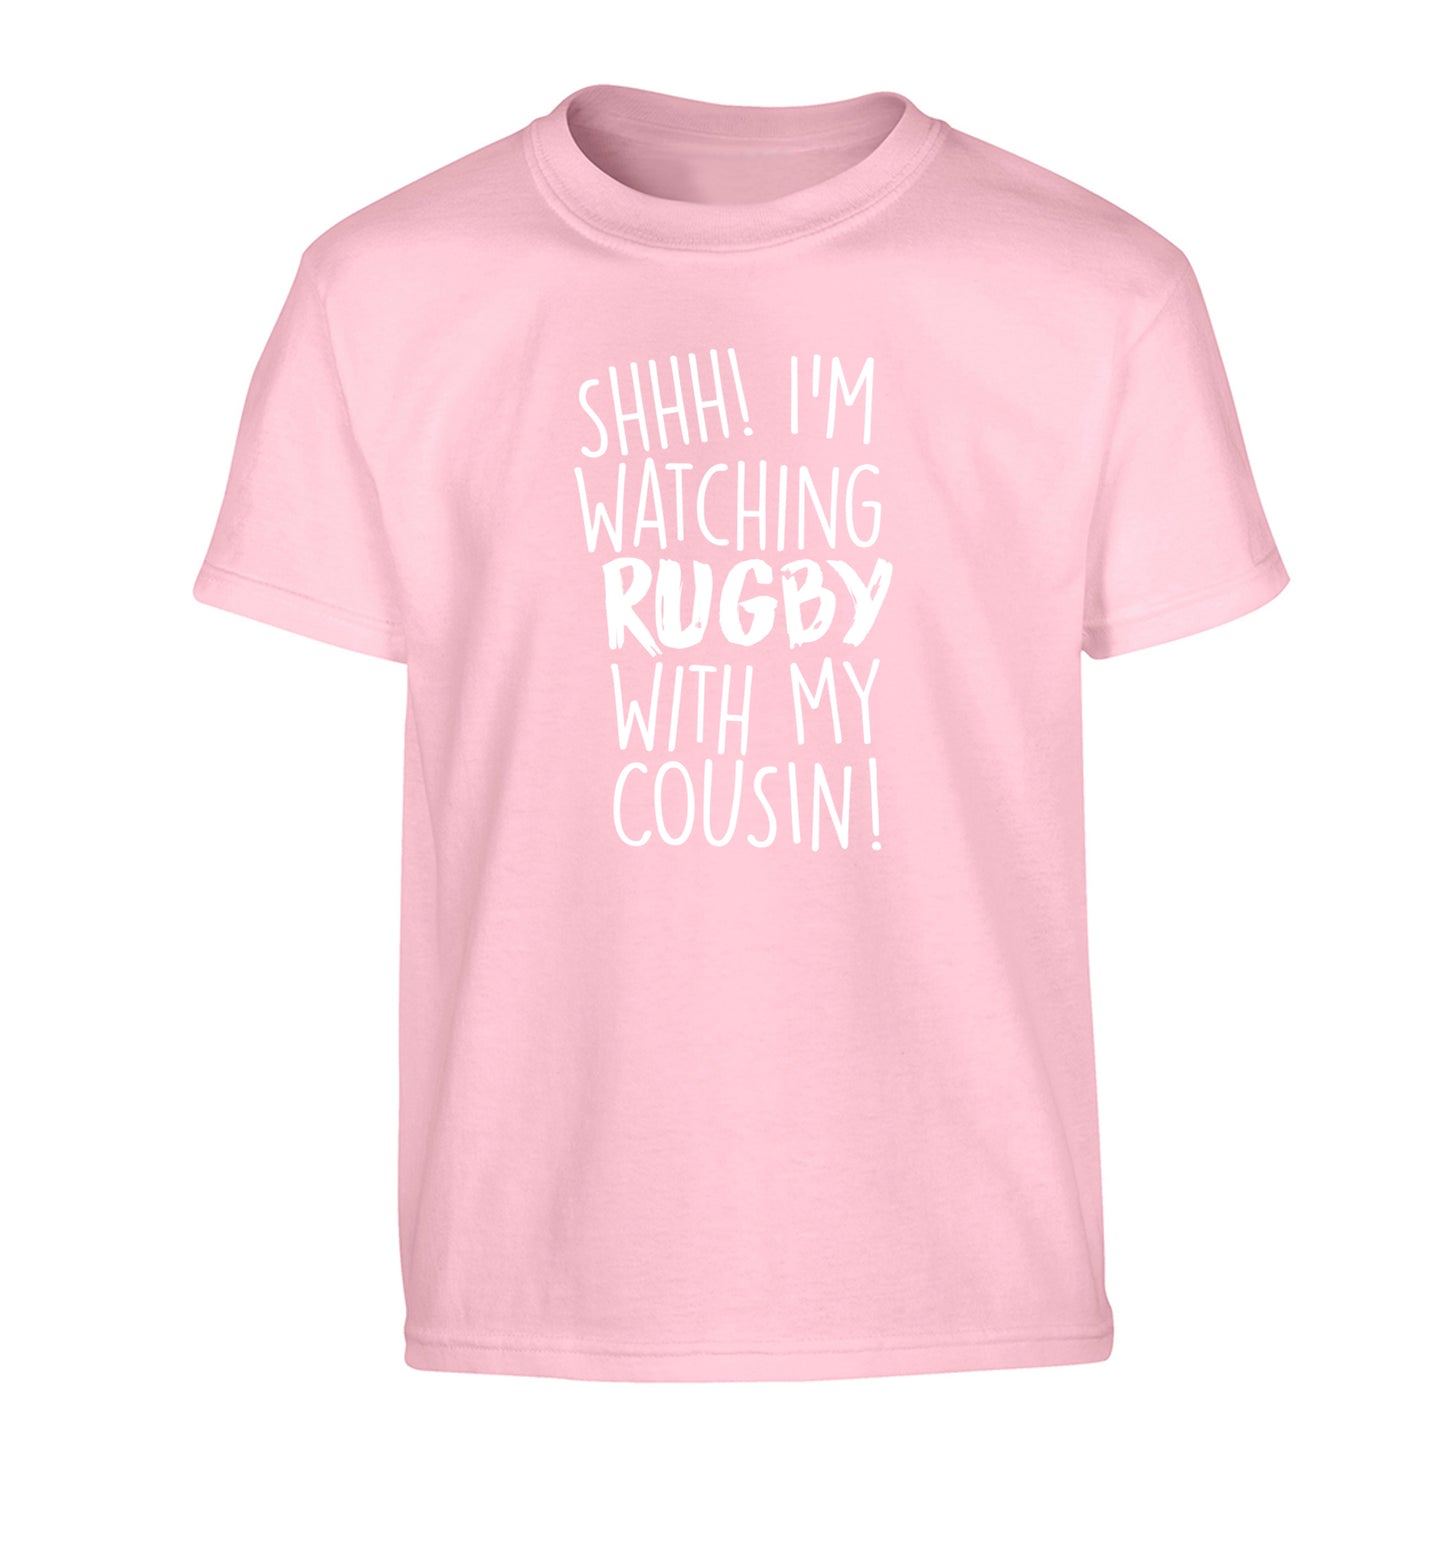 Shhh I'm watching rugby with my cousin Children's light pink Tshirt 12-13 Years